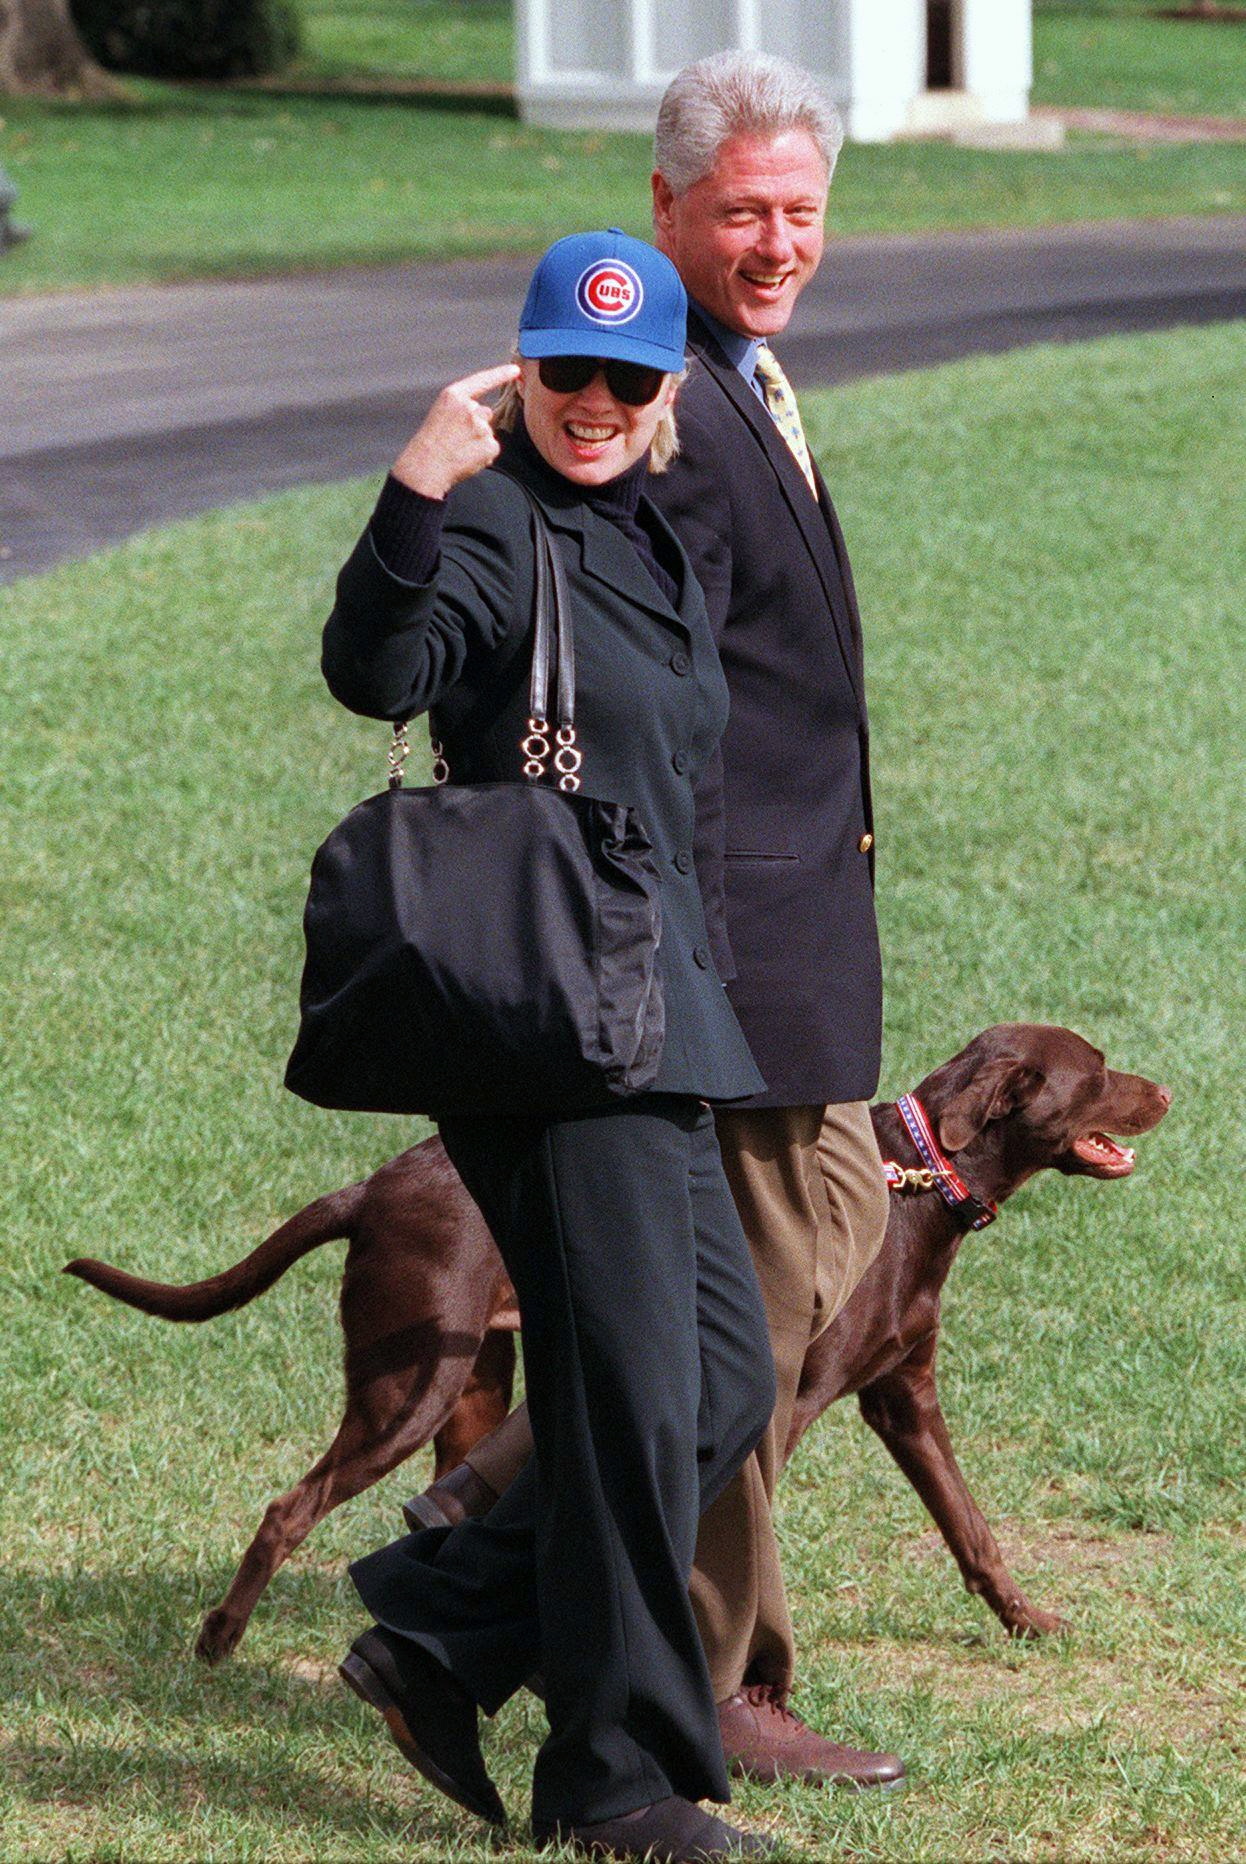 PHOTO: Then first lady Hillary Clinton points to her Chicago Cubs baseball cap on the South Lawn of the White House with husband, then President Bill Clinton and their dog, Buddy, Oct. 3, 1998.